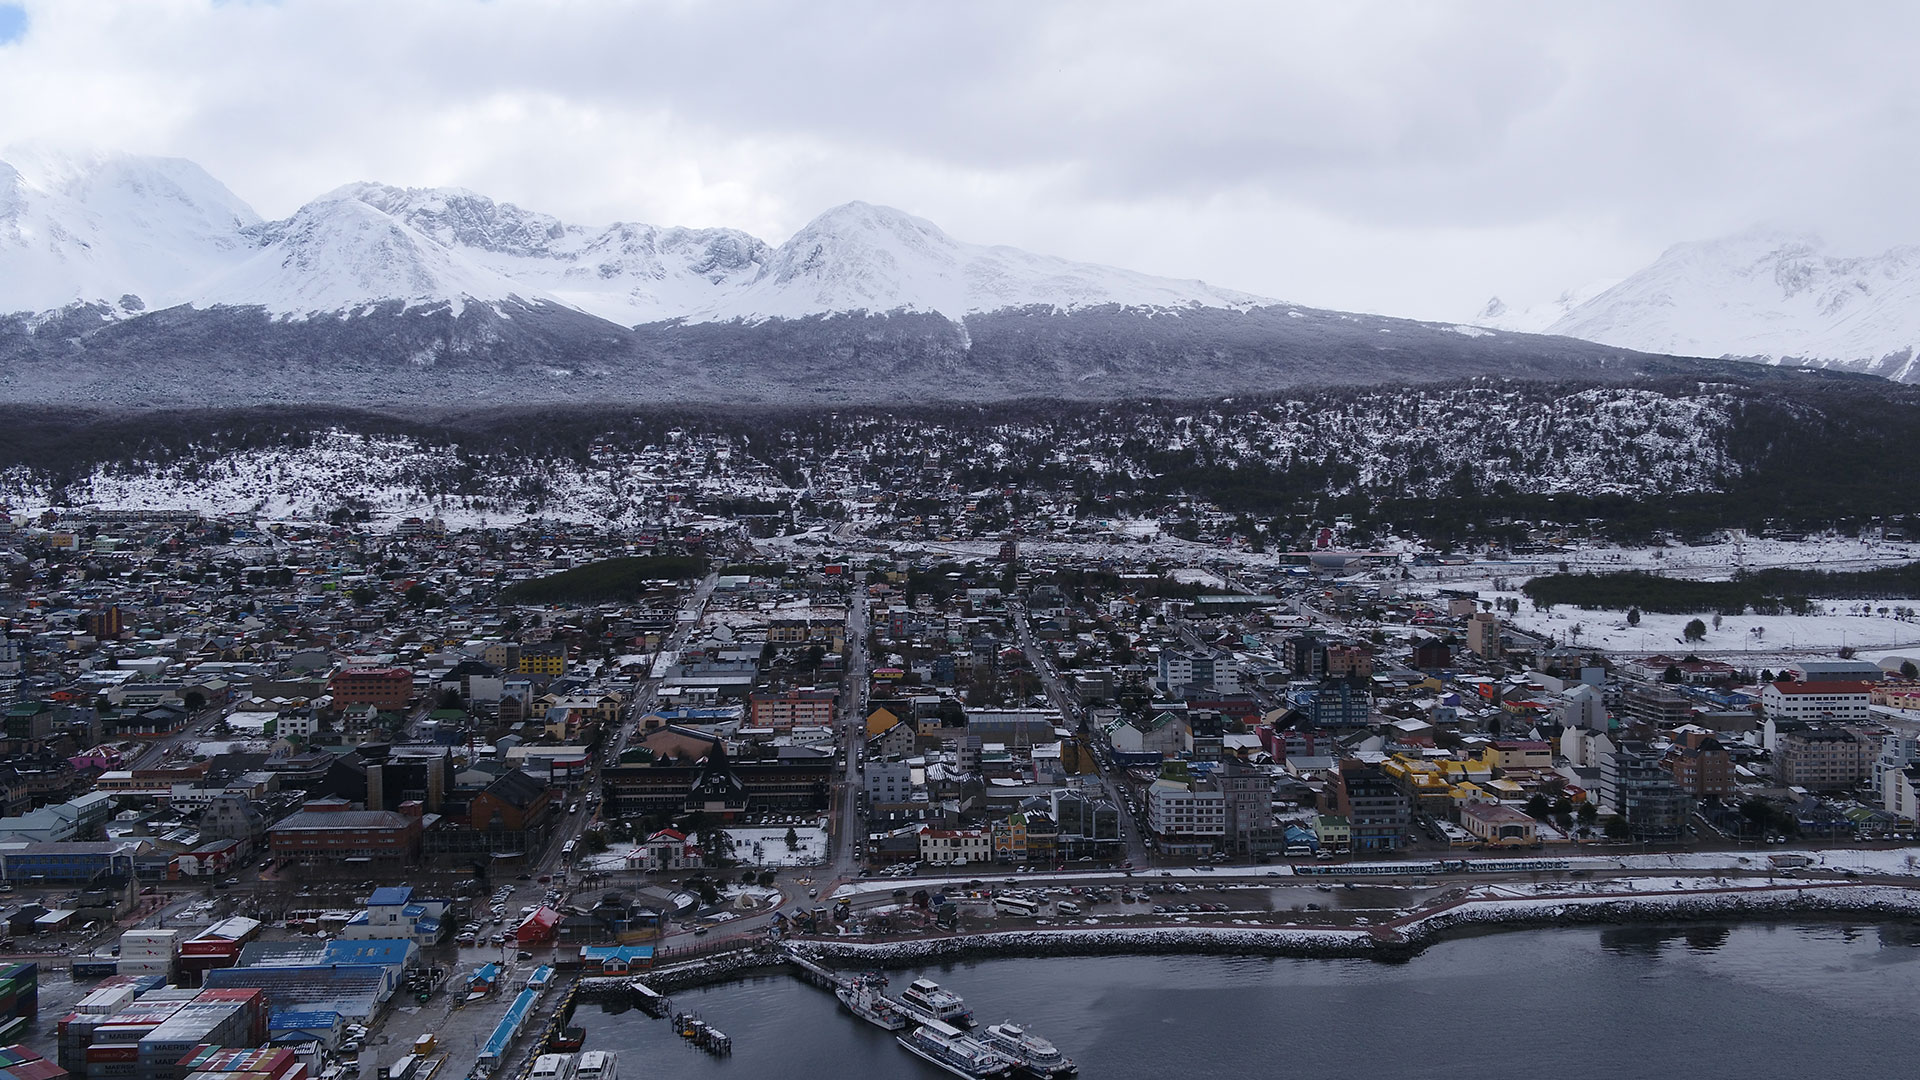 Ushuaia was founded in 1884 as a presidio (a prison) by order of the Argentine government.  The prisoners built the city and turned it into a port for the region.